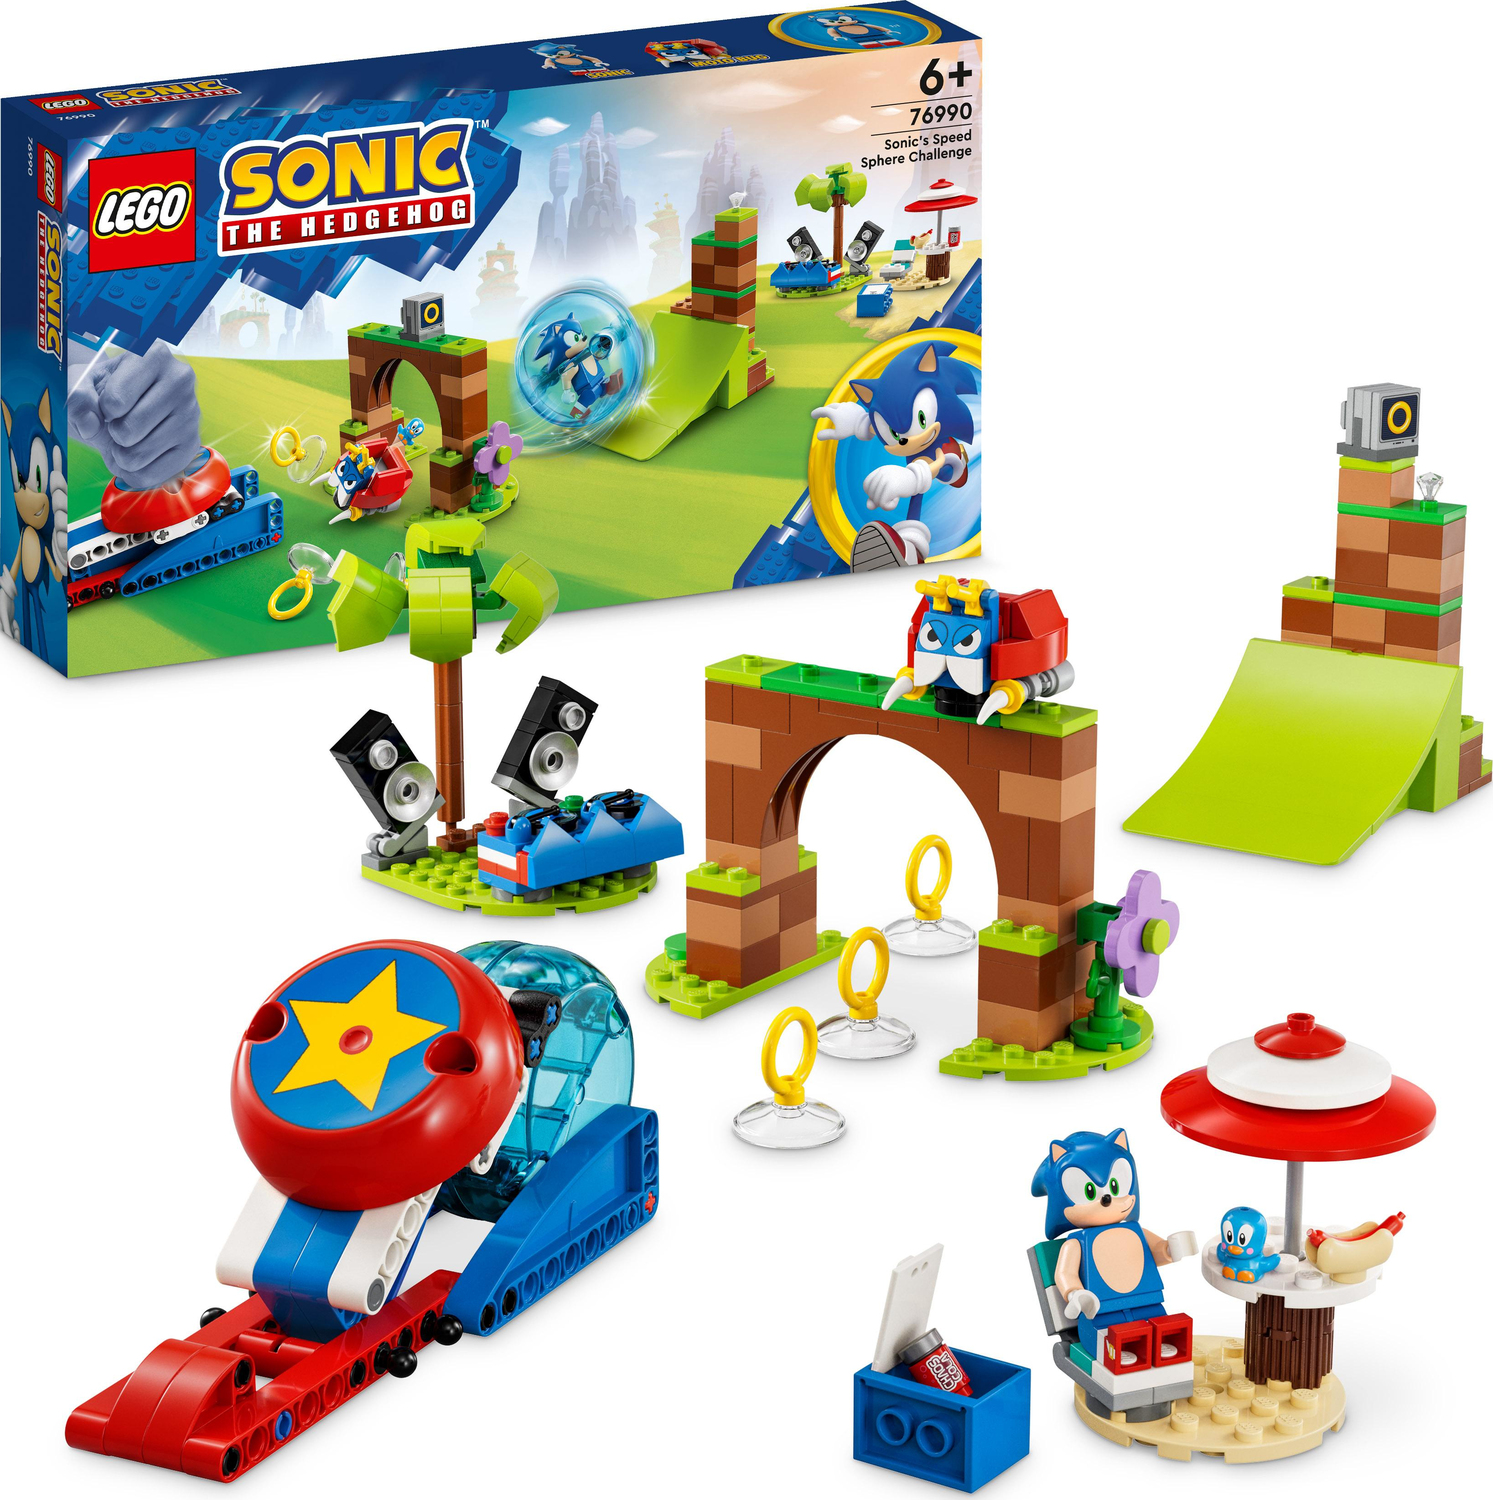 LEGO Sonic the Hedgehog Sonic's Speed Sphere Challenge - Imagine That Toys